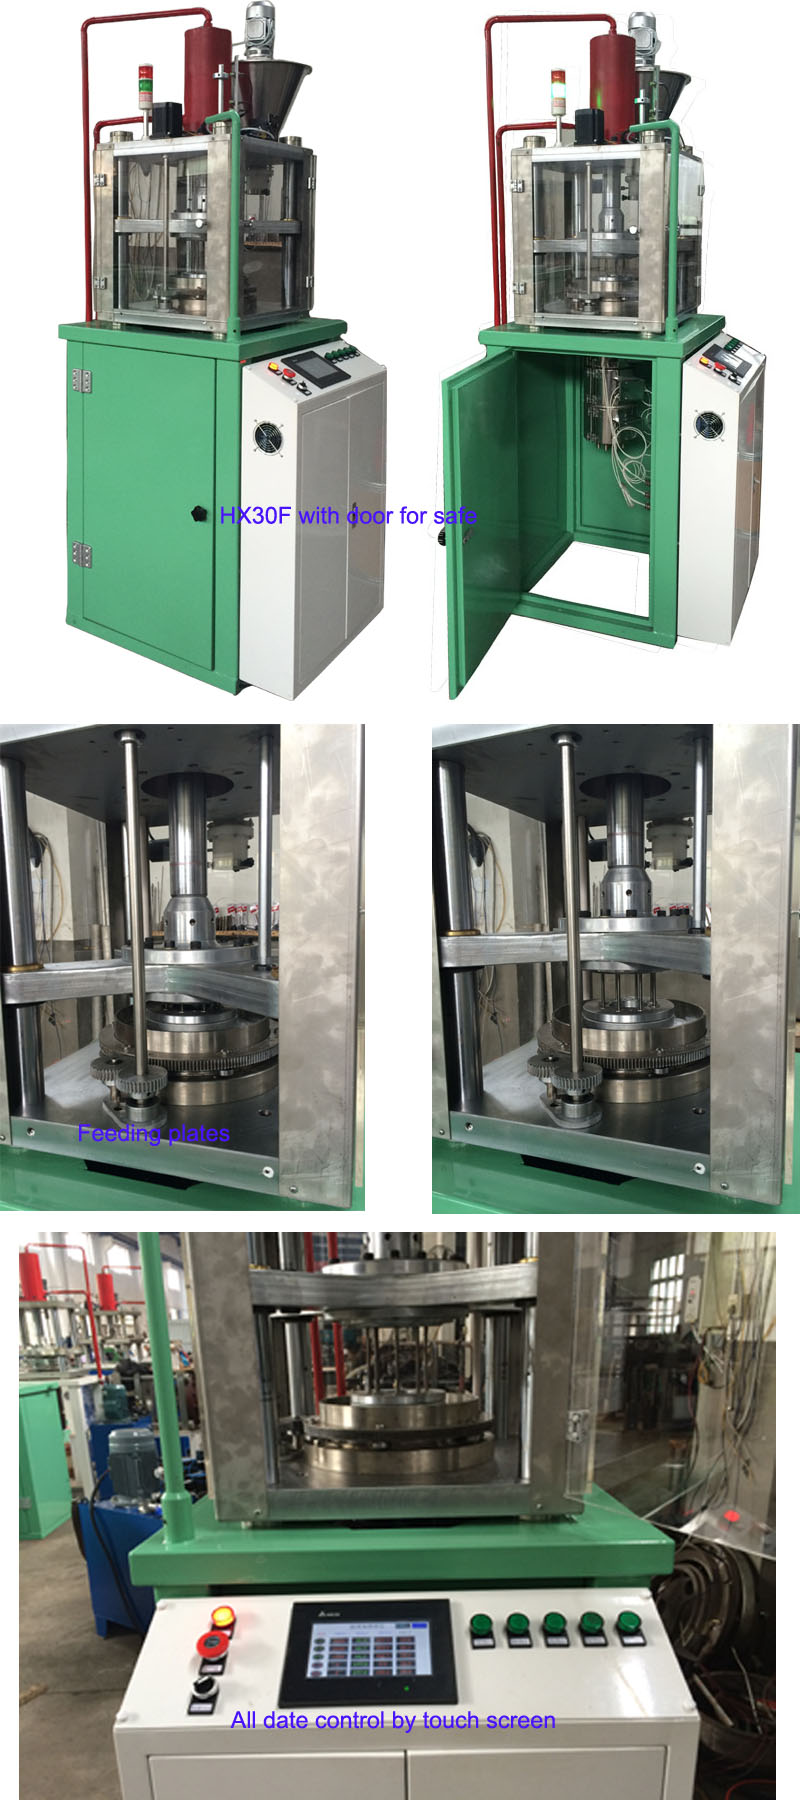 Ram extrusion machine for PTFE rod with full cabinet